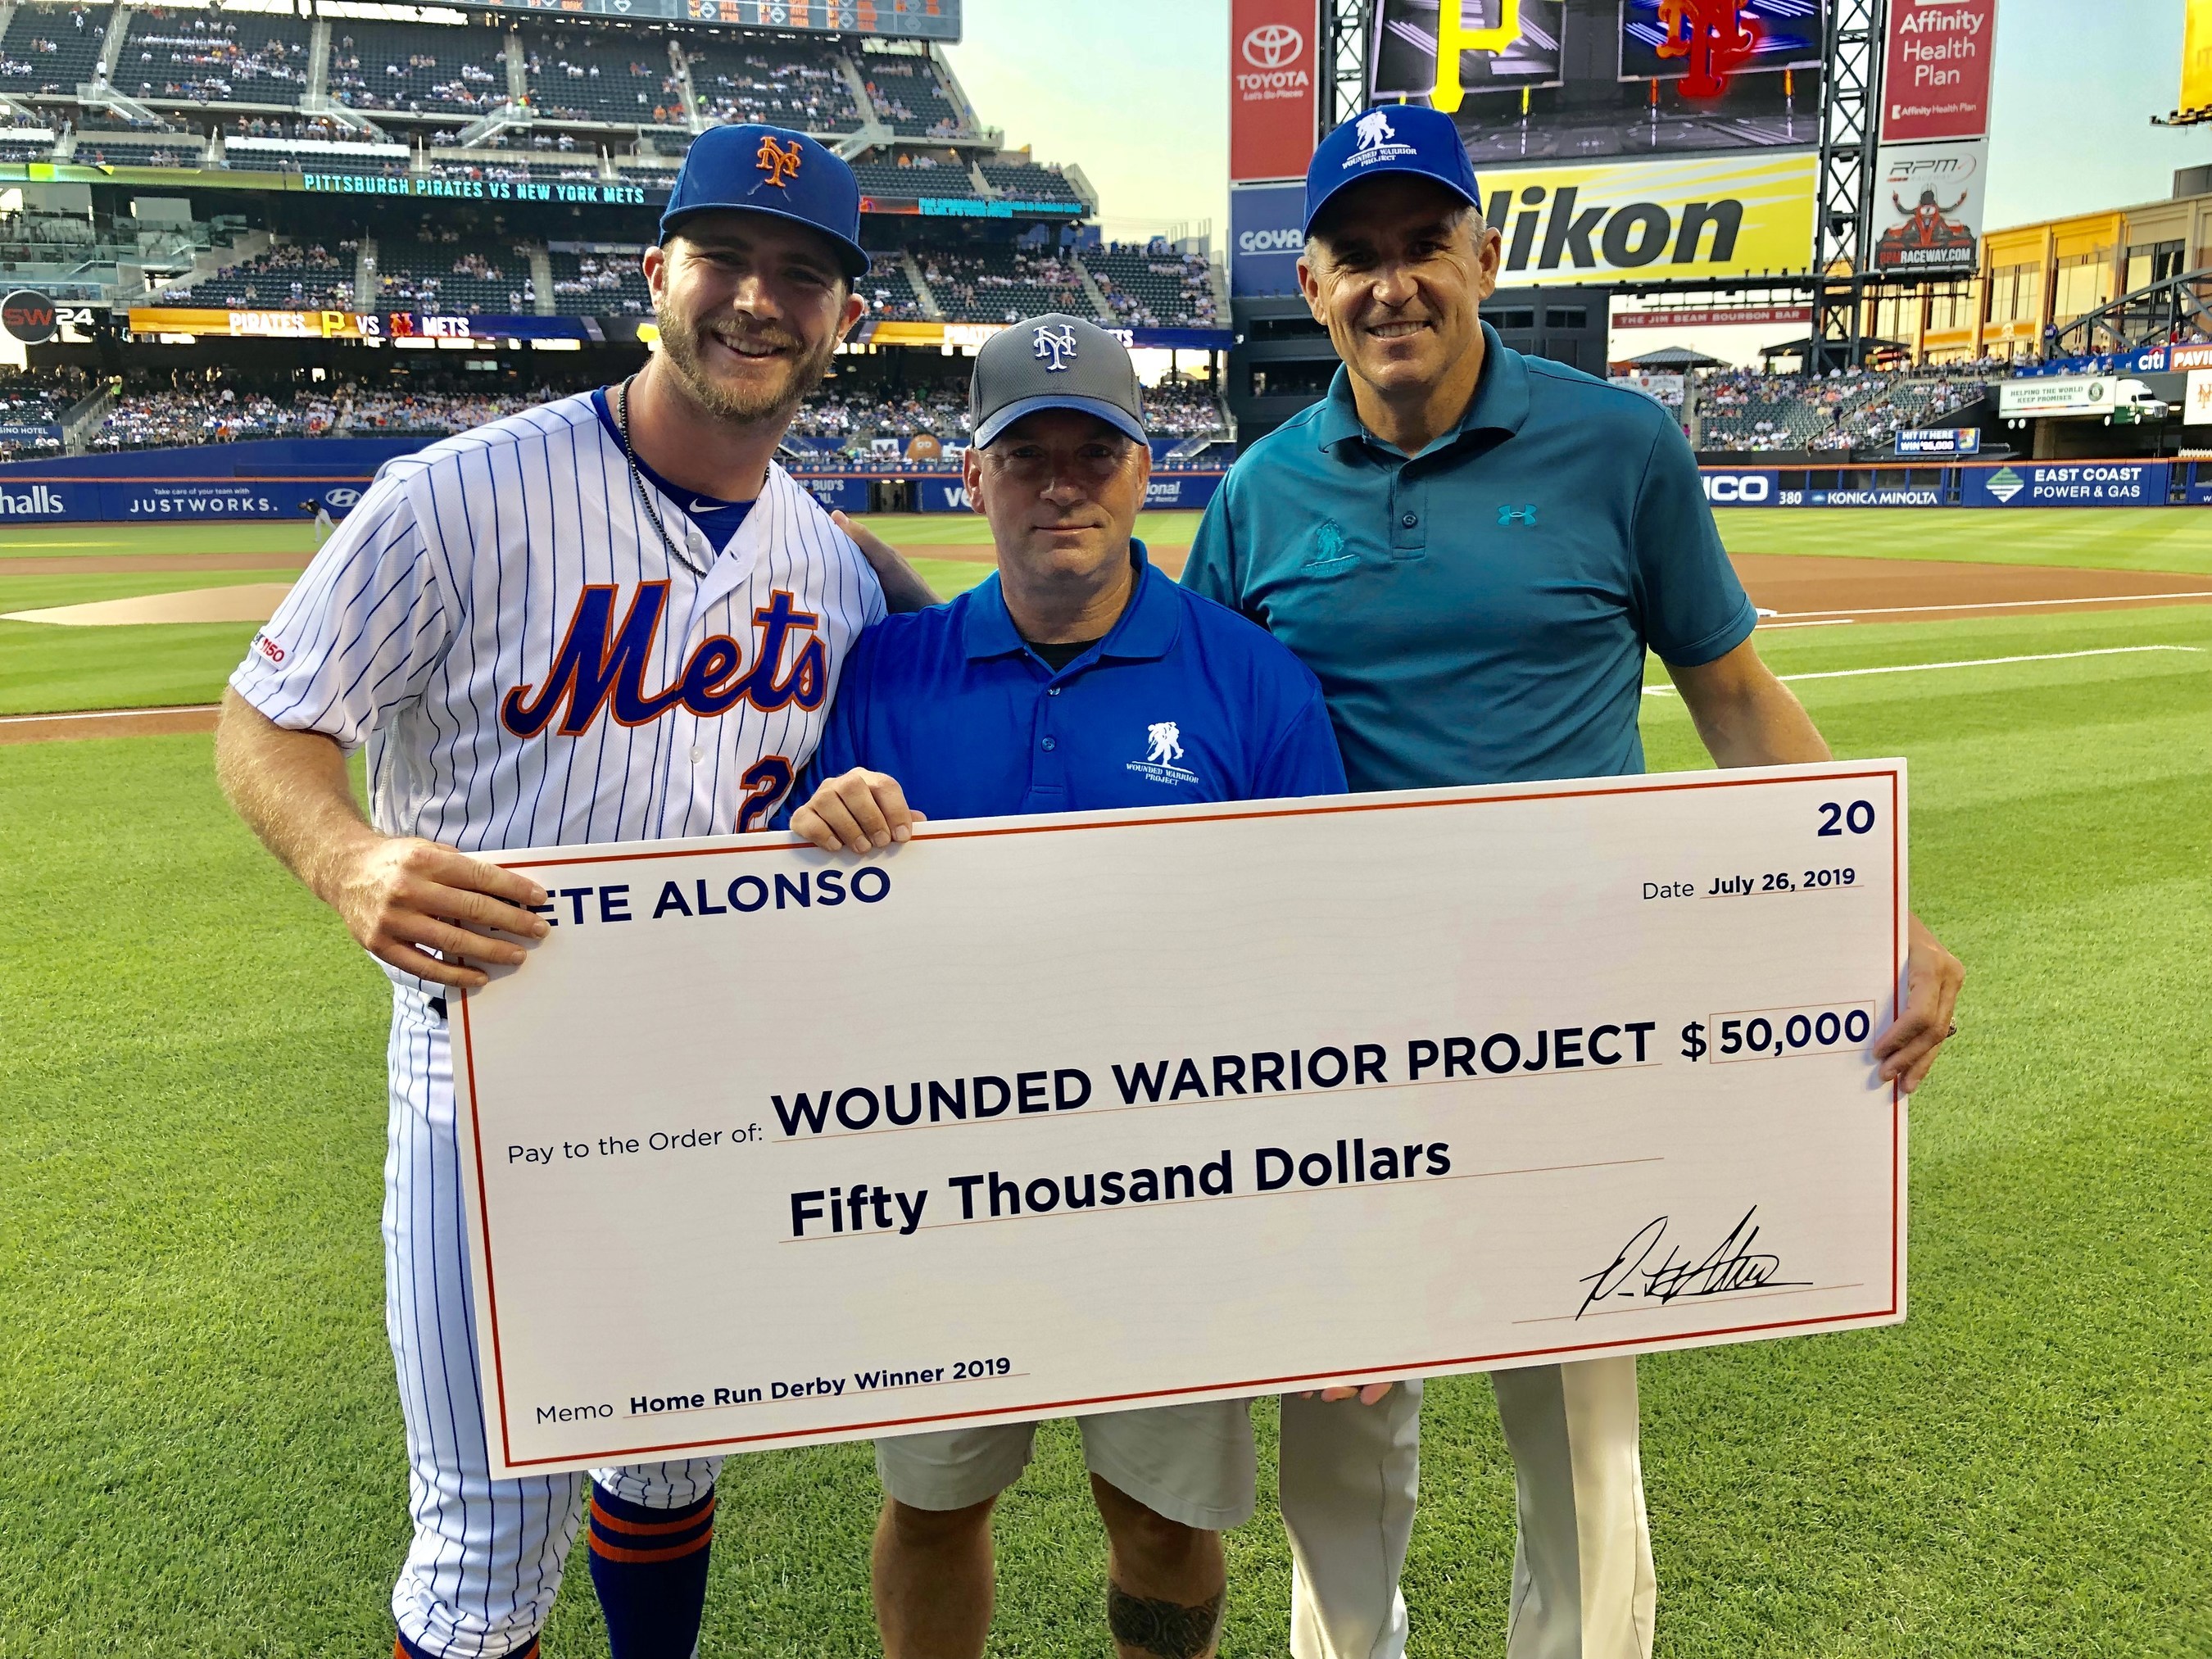 N.Y. Mets' All-Star Pete Alonso Donates $50,000 to Veterans